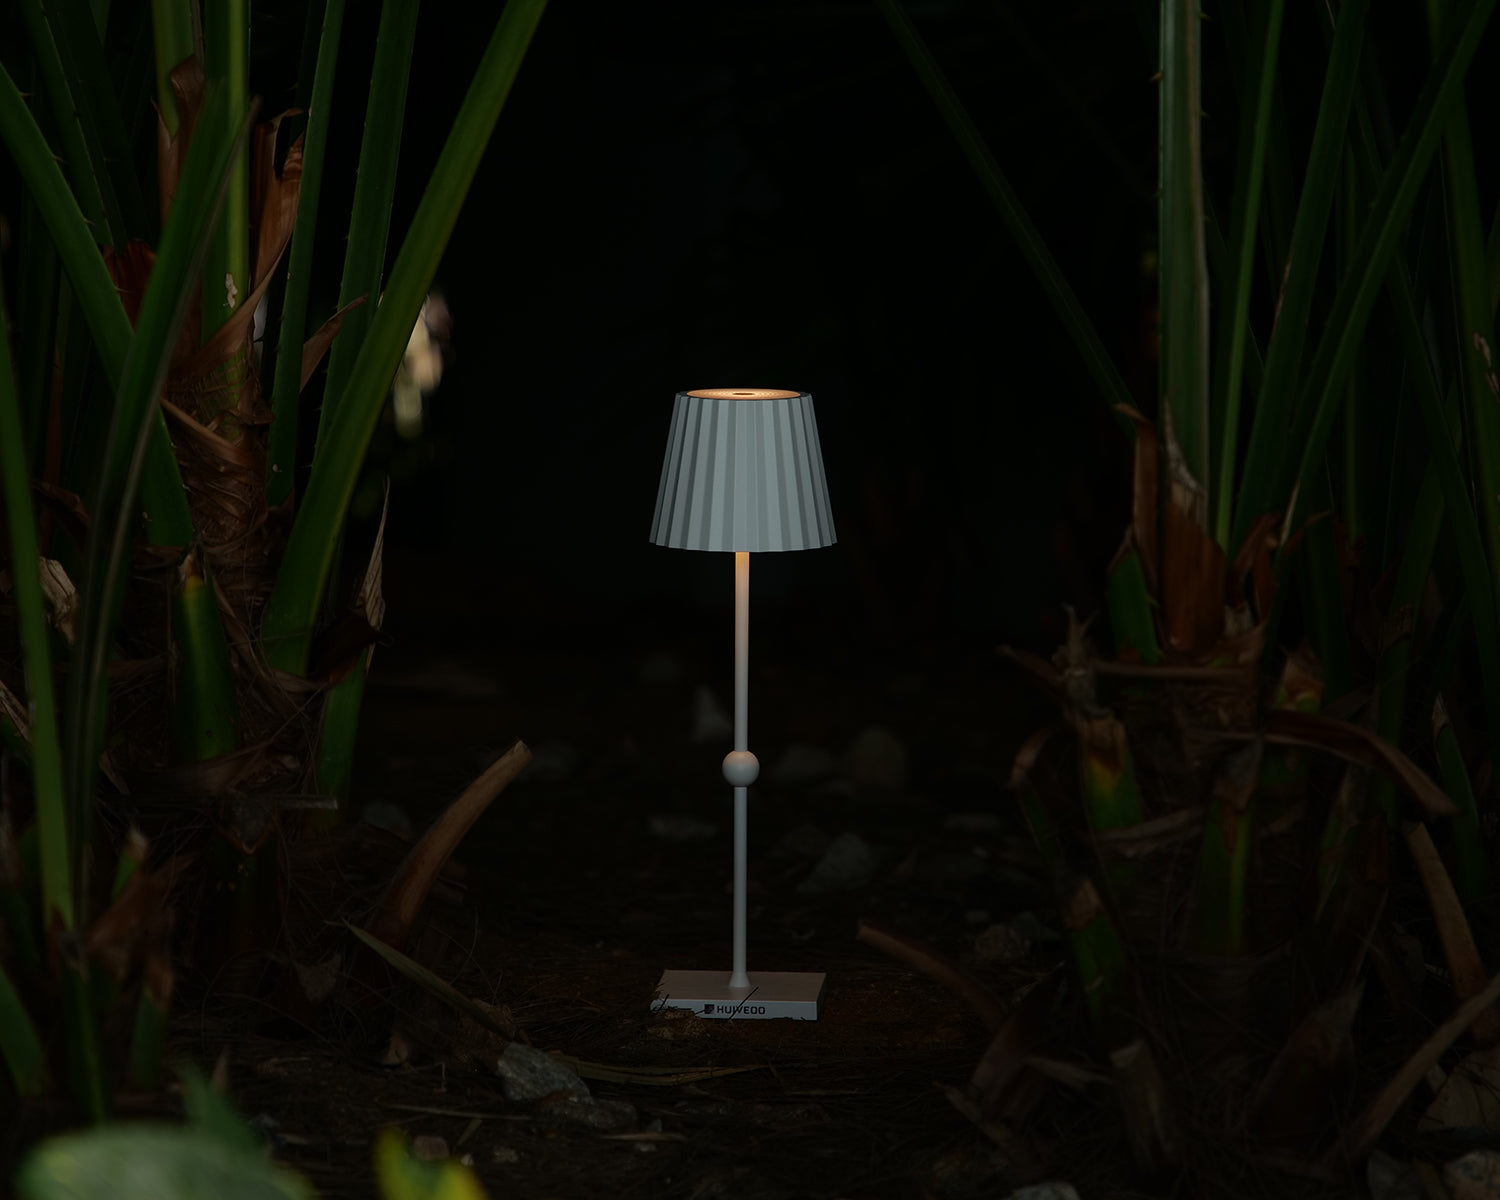 Huiveoo cordless desk lamp in forest